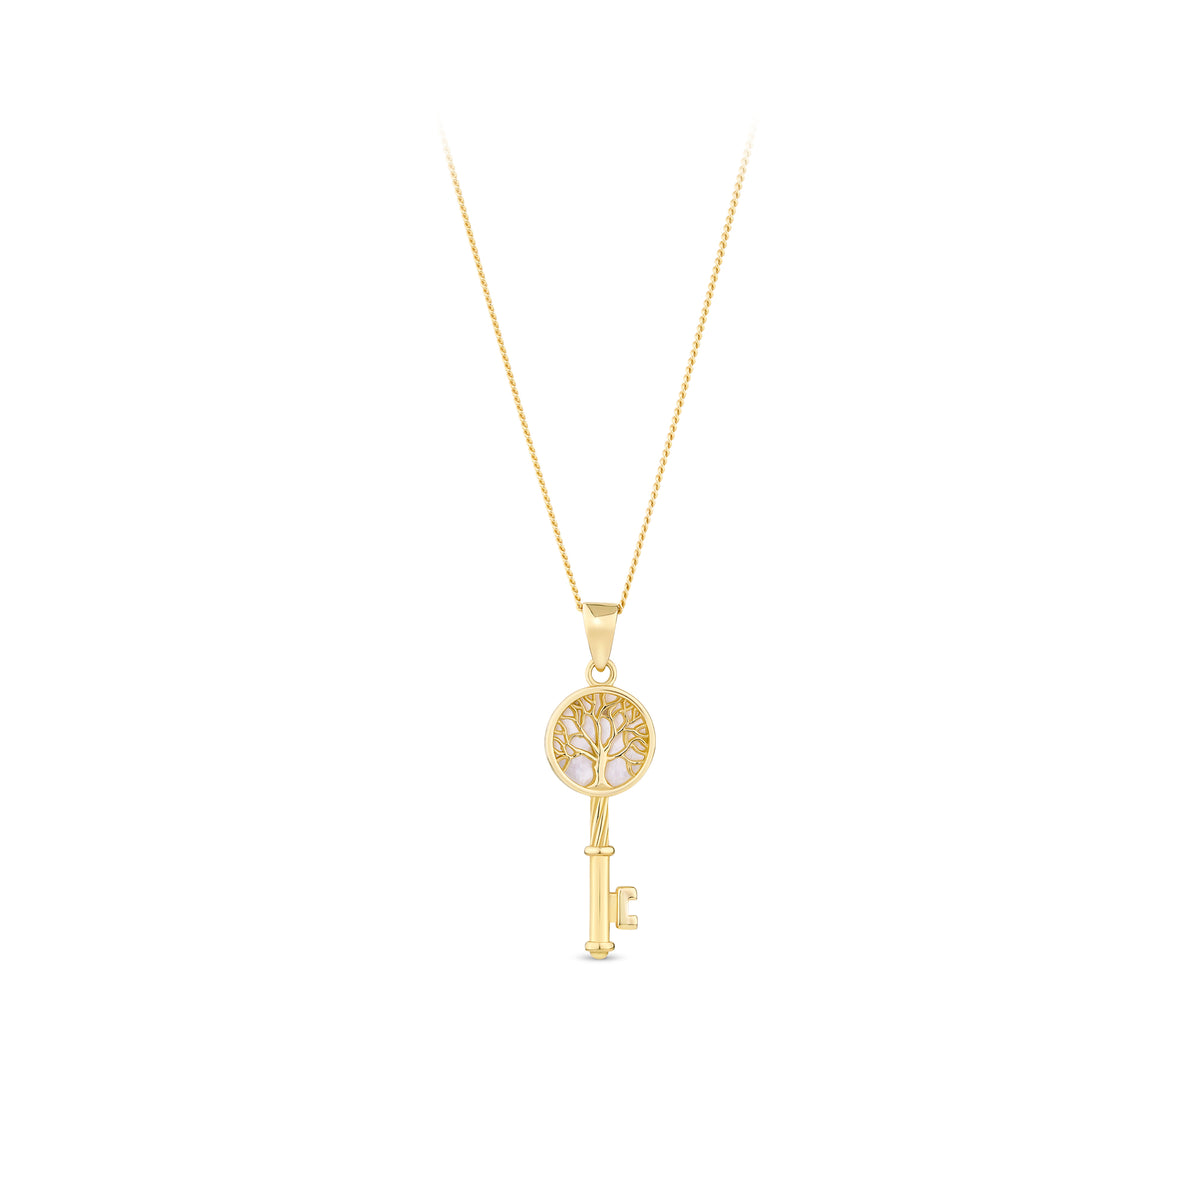 Mother of Pearl Tree of Life Key Pendant in 9ct Yellow Gold